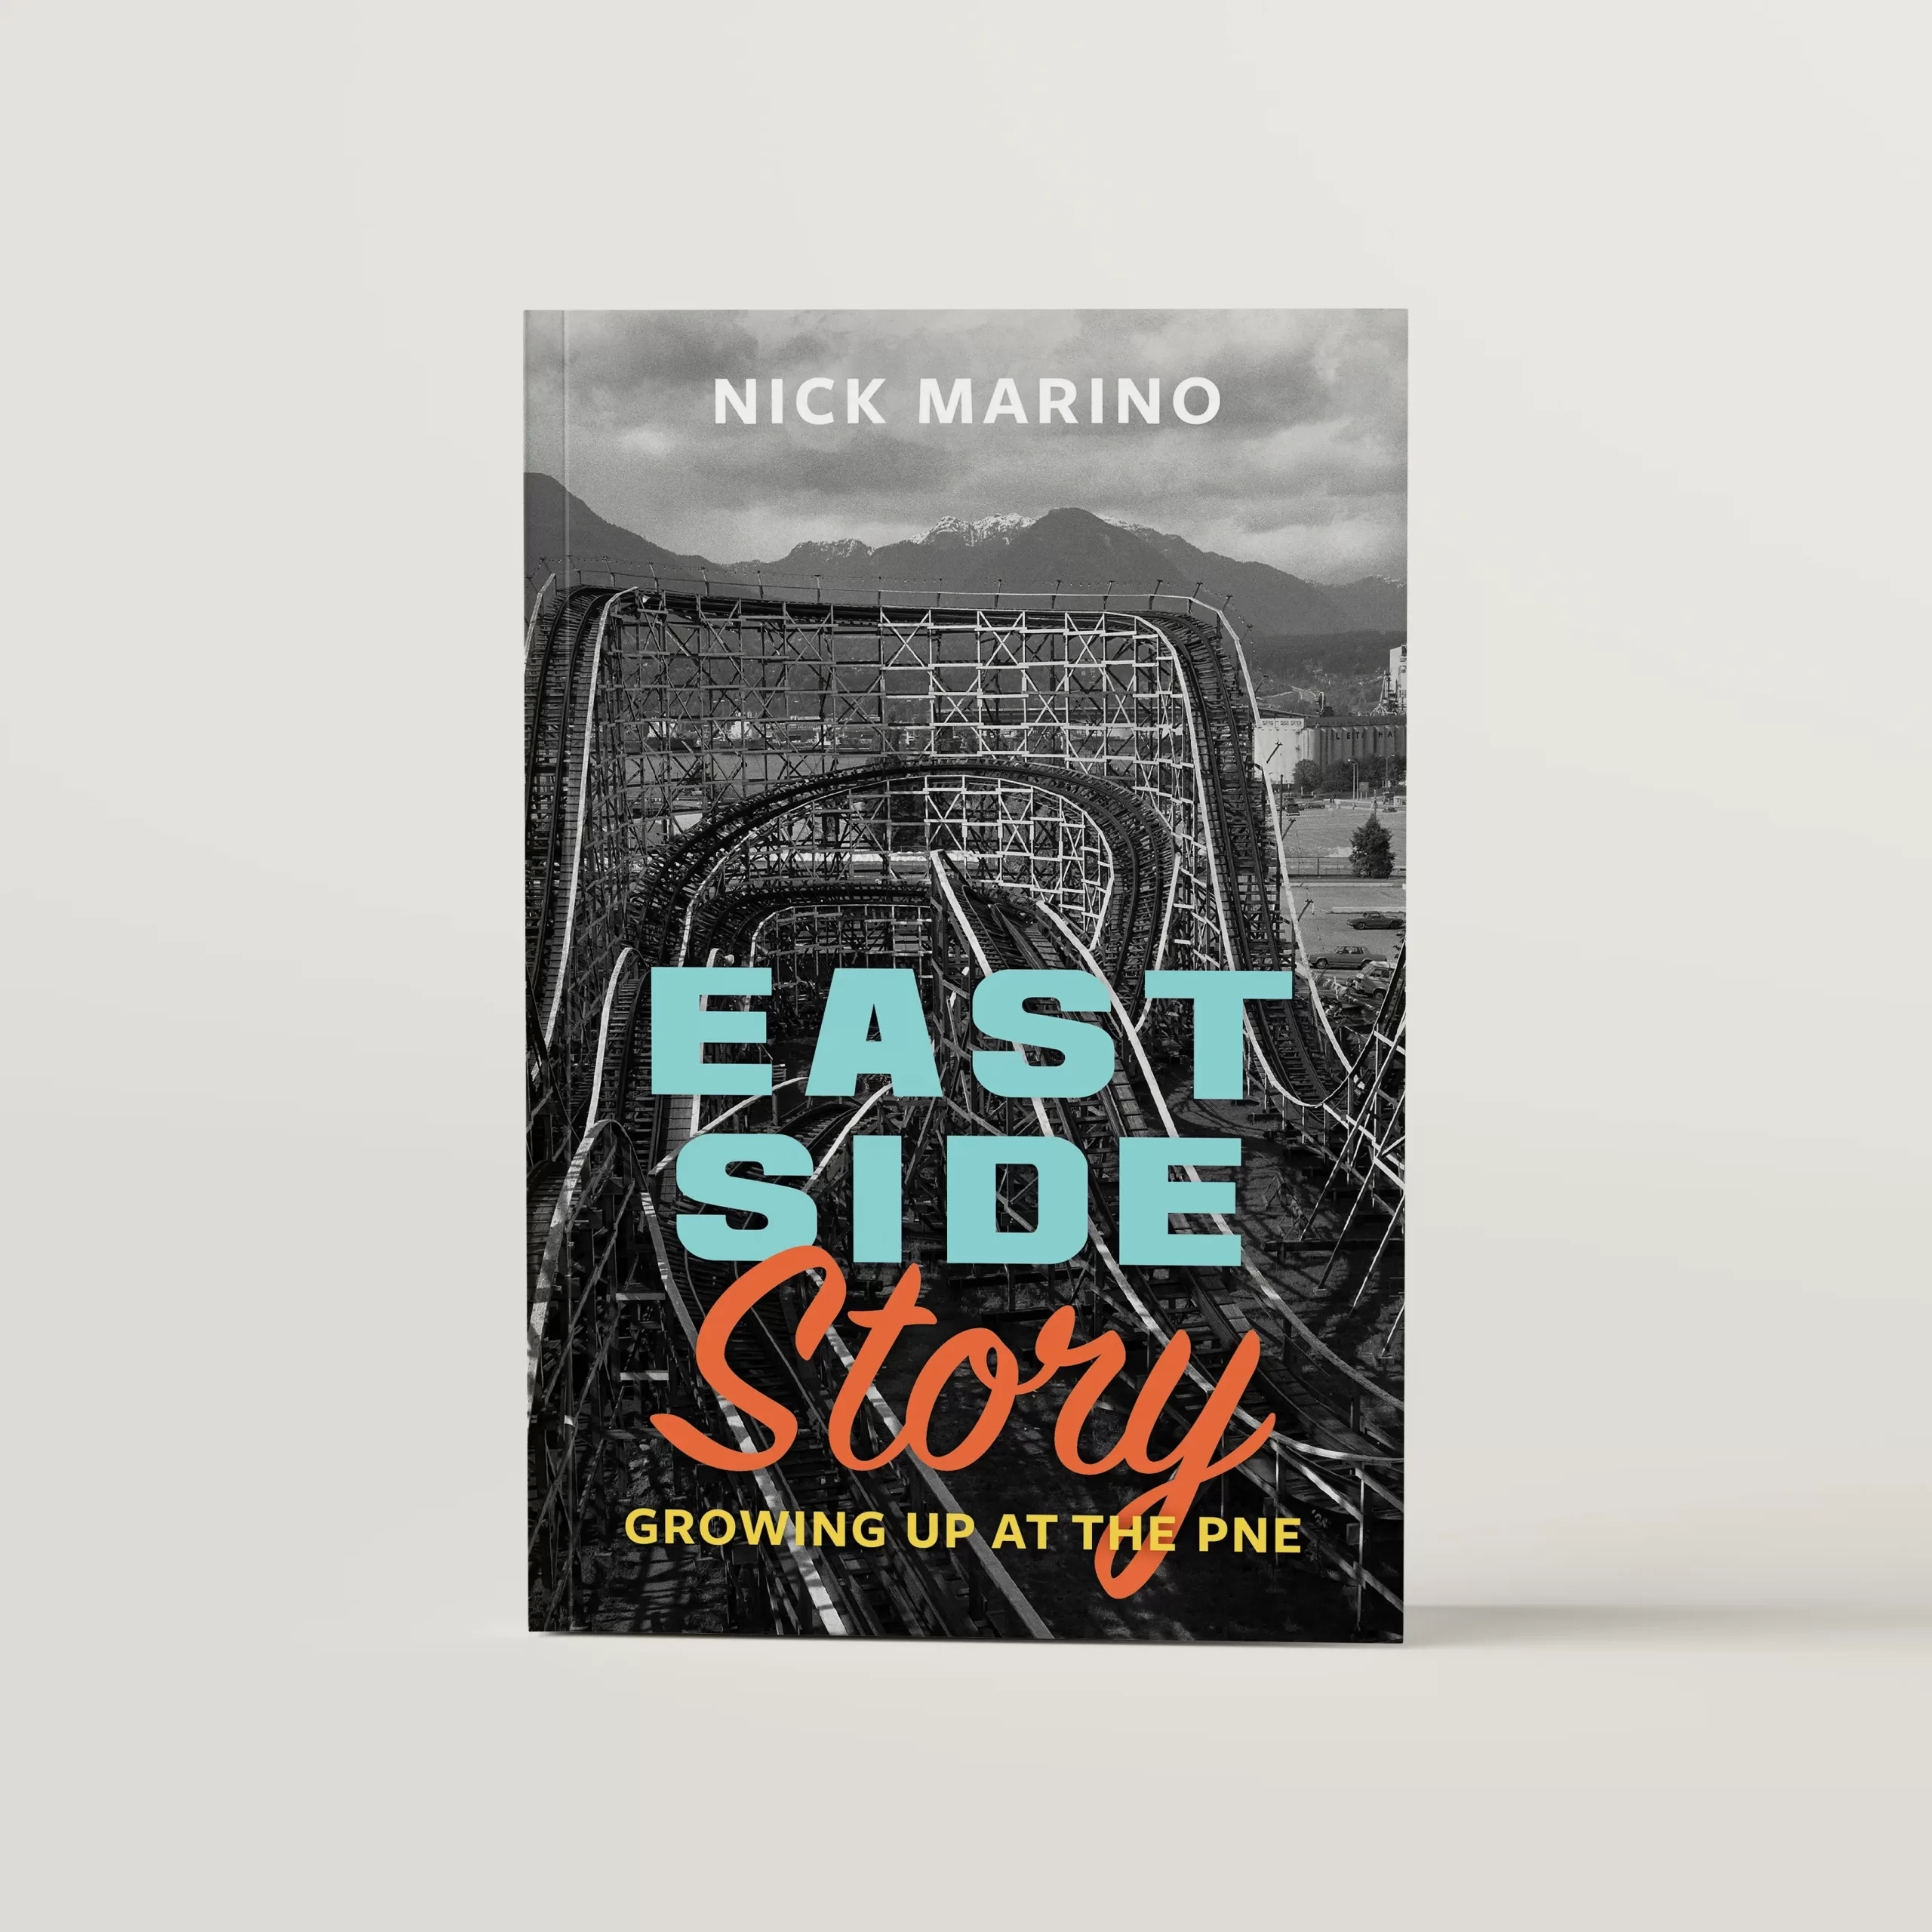 Cover design of East Side Story featuring a black and white photo of the rollercoaster at the PNE in Vancouver